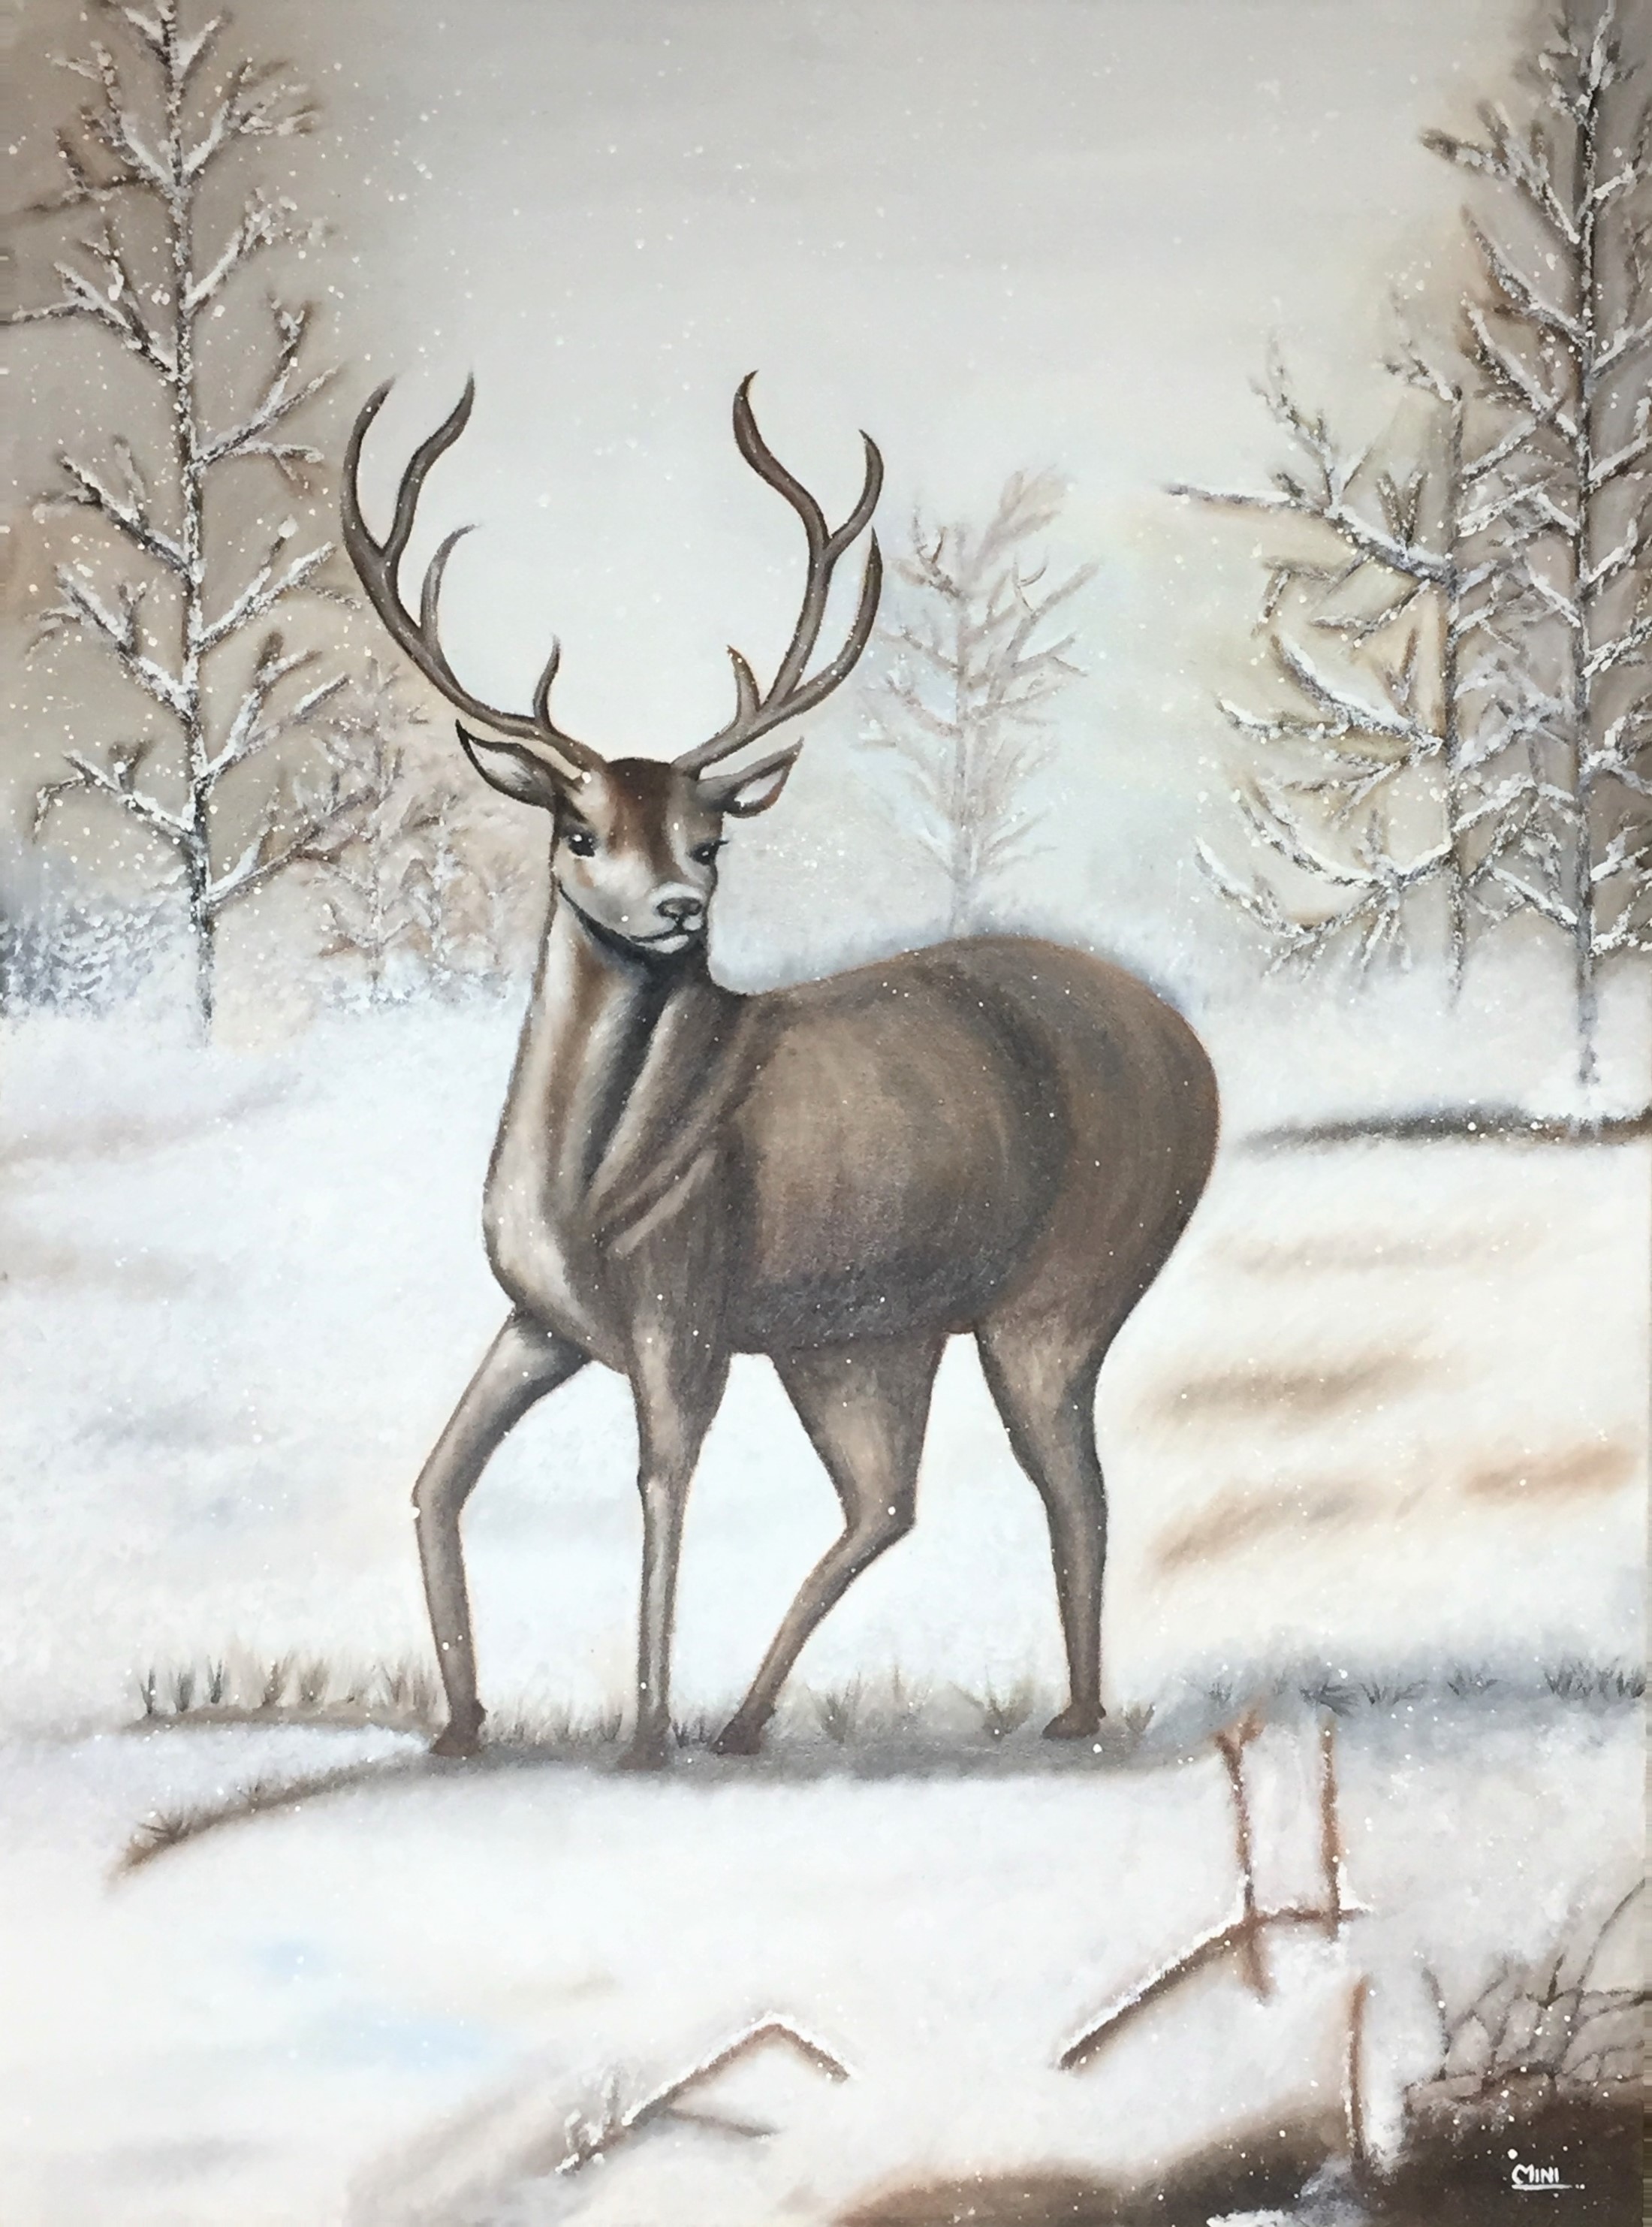 The Majestic Stag in Snow